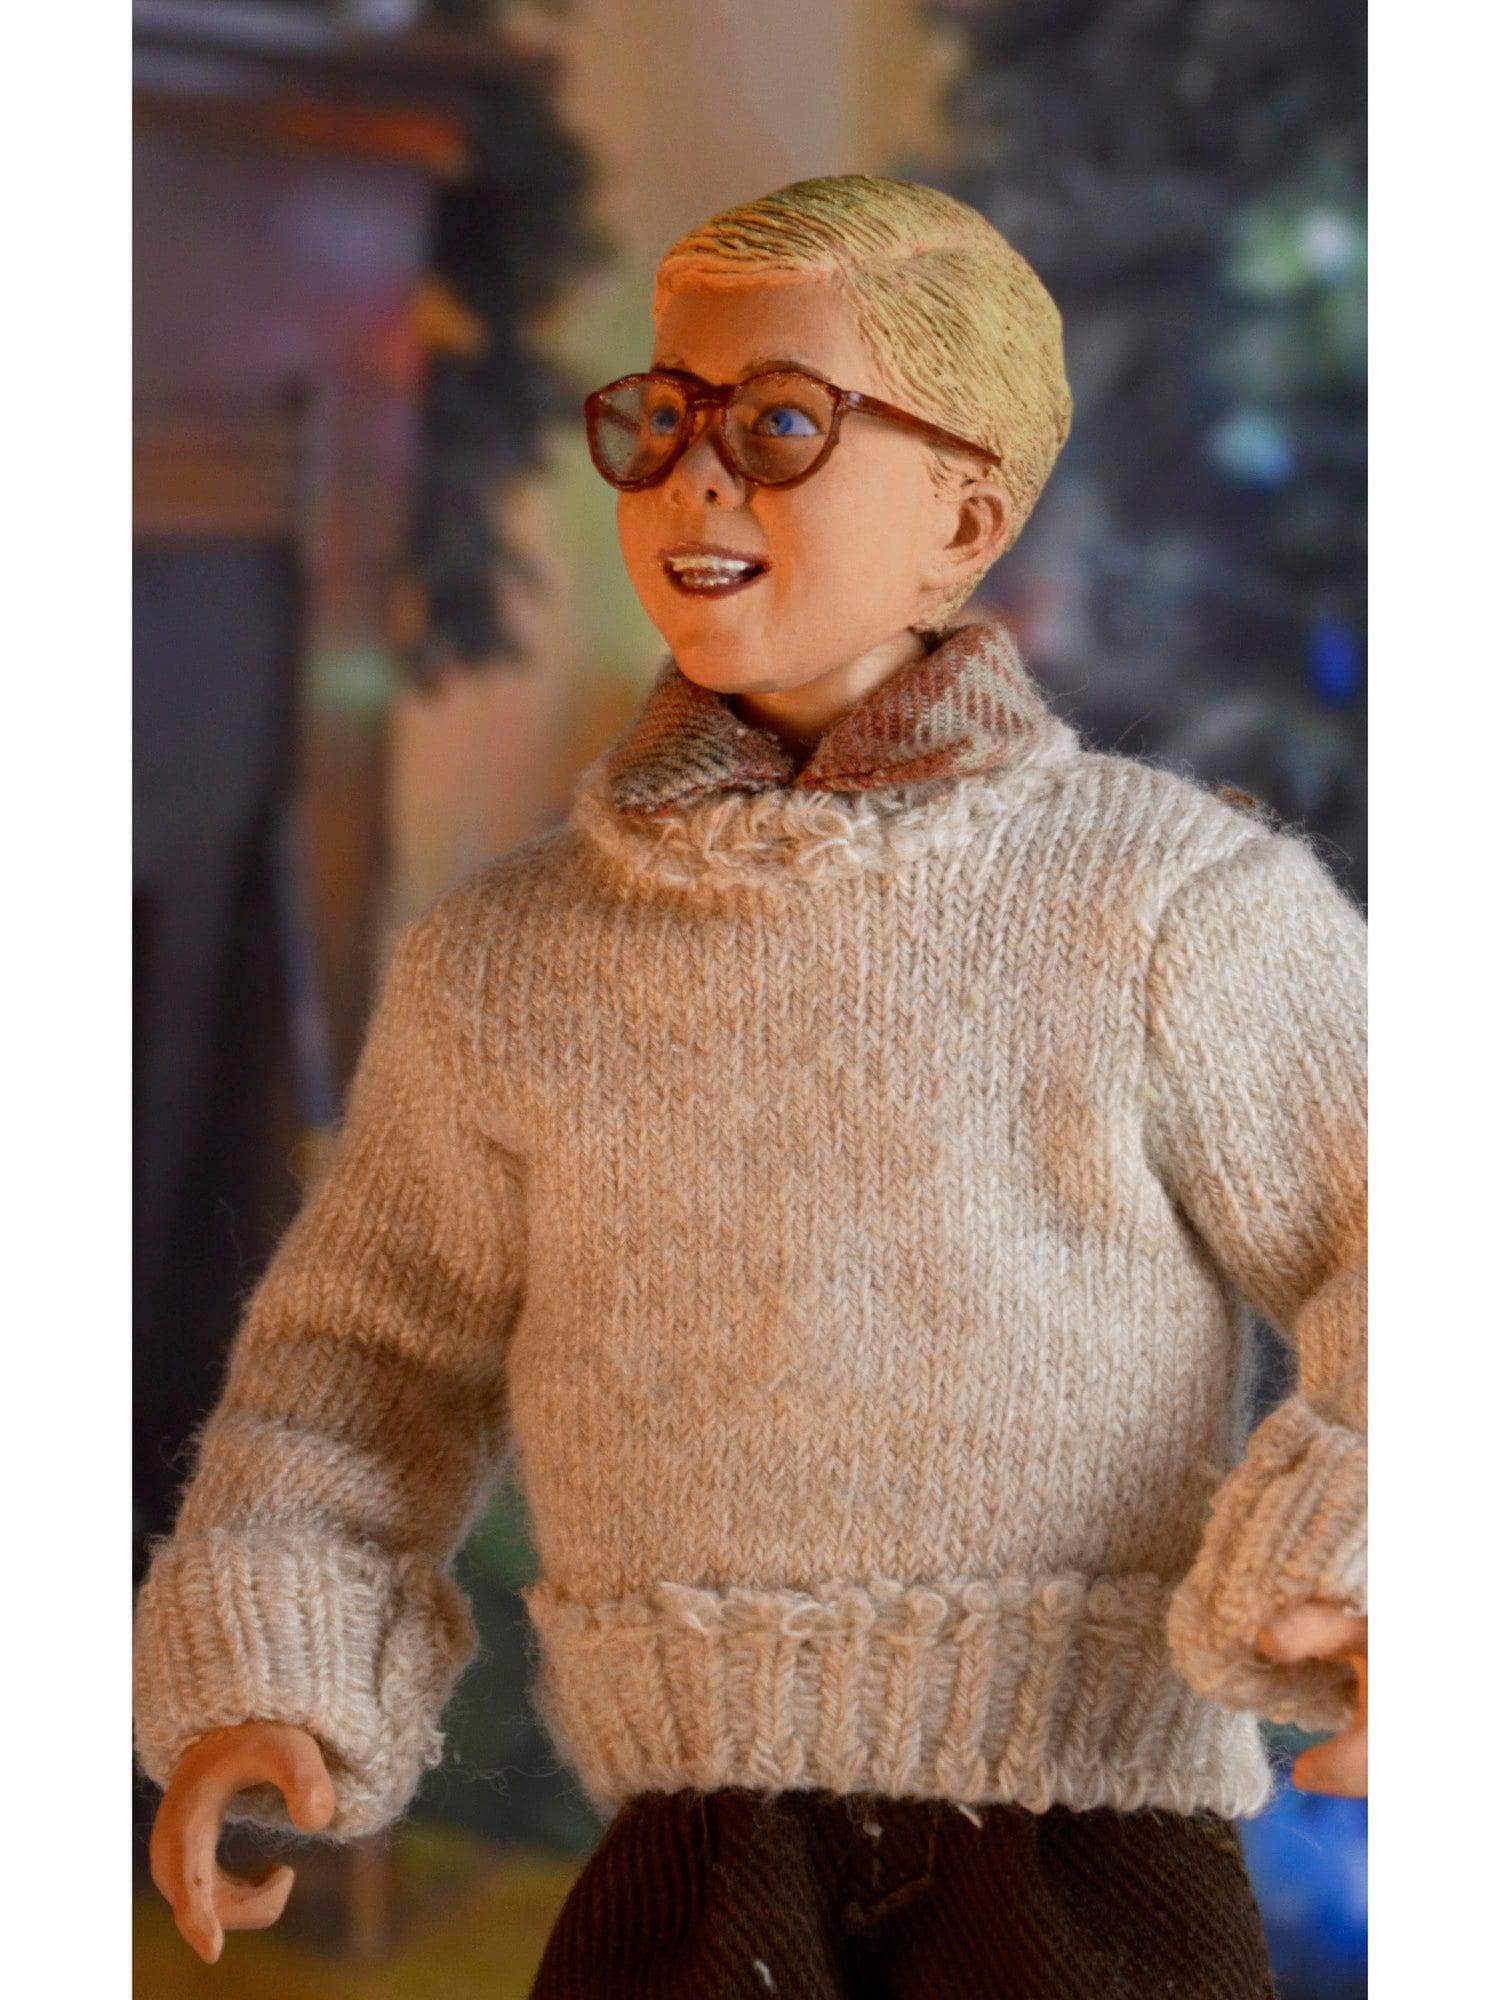 NECA - A Christmas Story - 8" Scale Clothed Action Figure - Ralphie - costumes.com